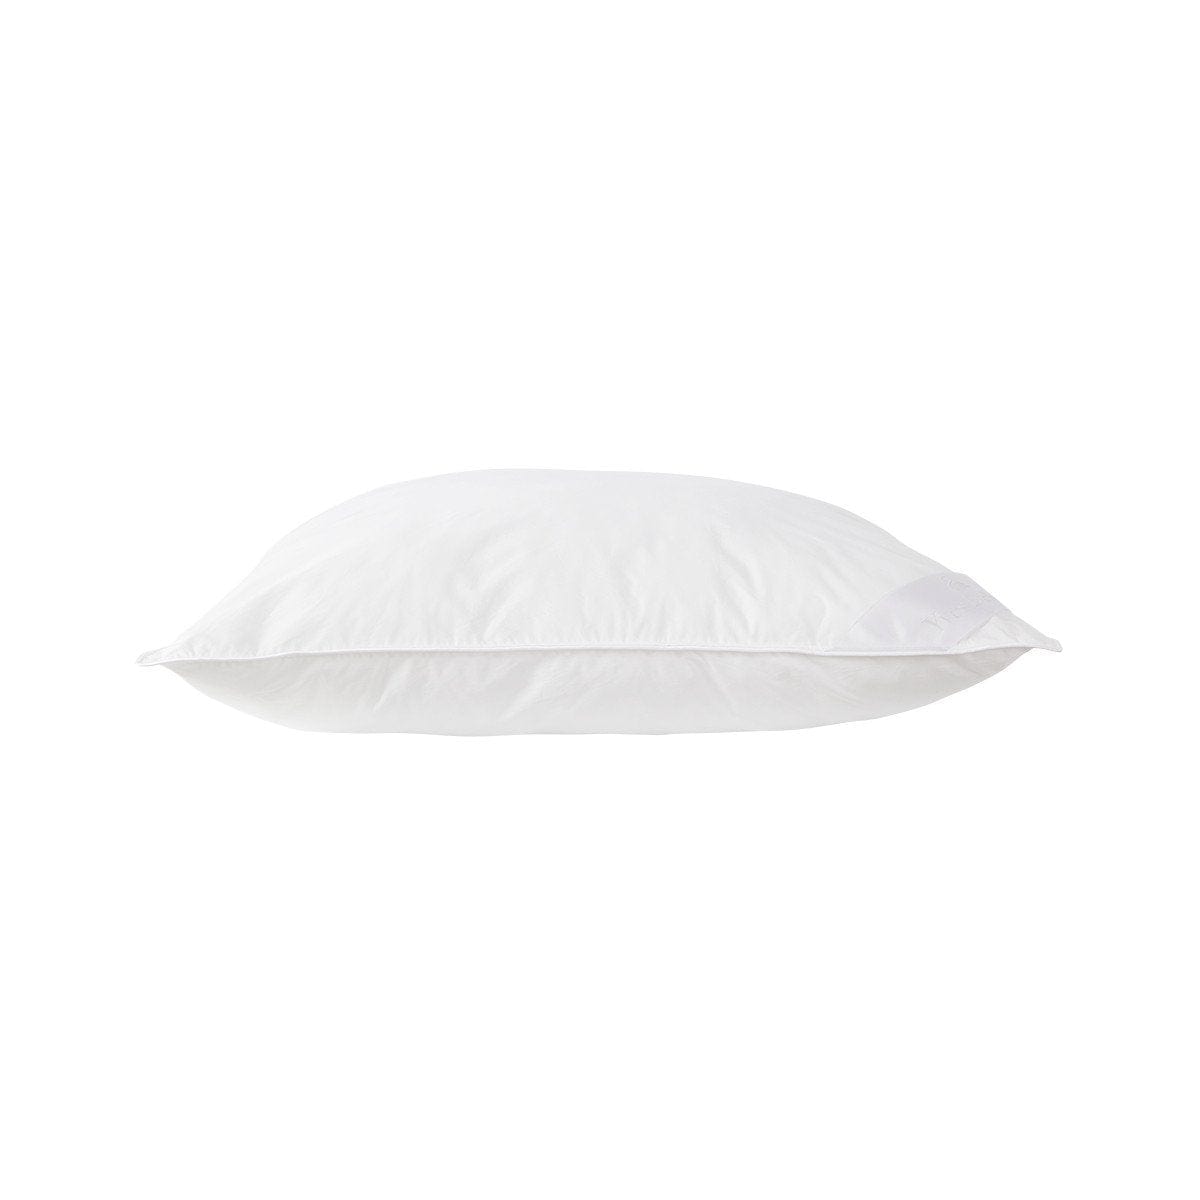 Pillows Actuel (Anti-Allergy) Soft Pillow by Yves Delorme Yves Delorme